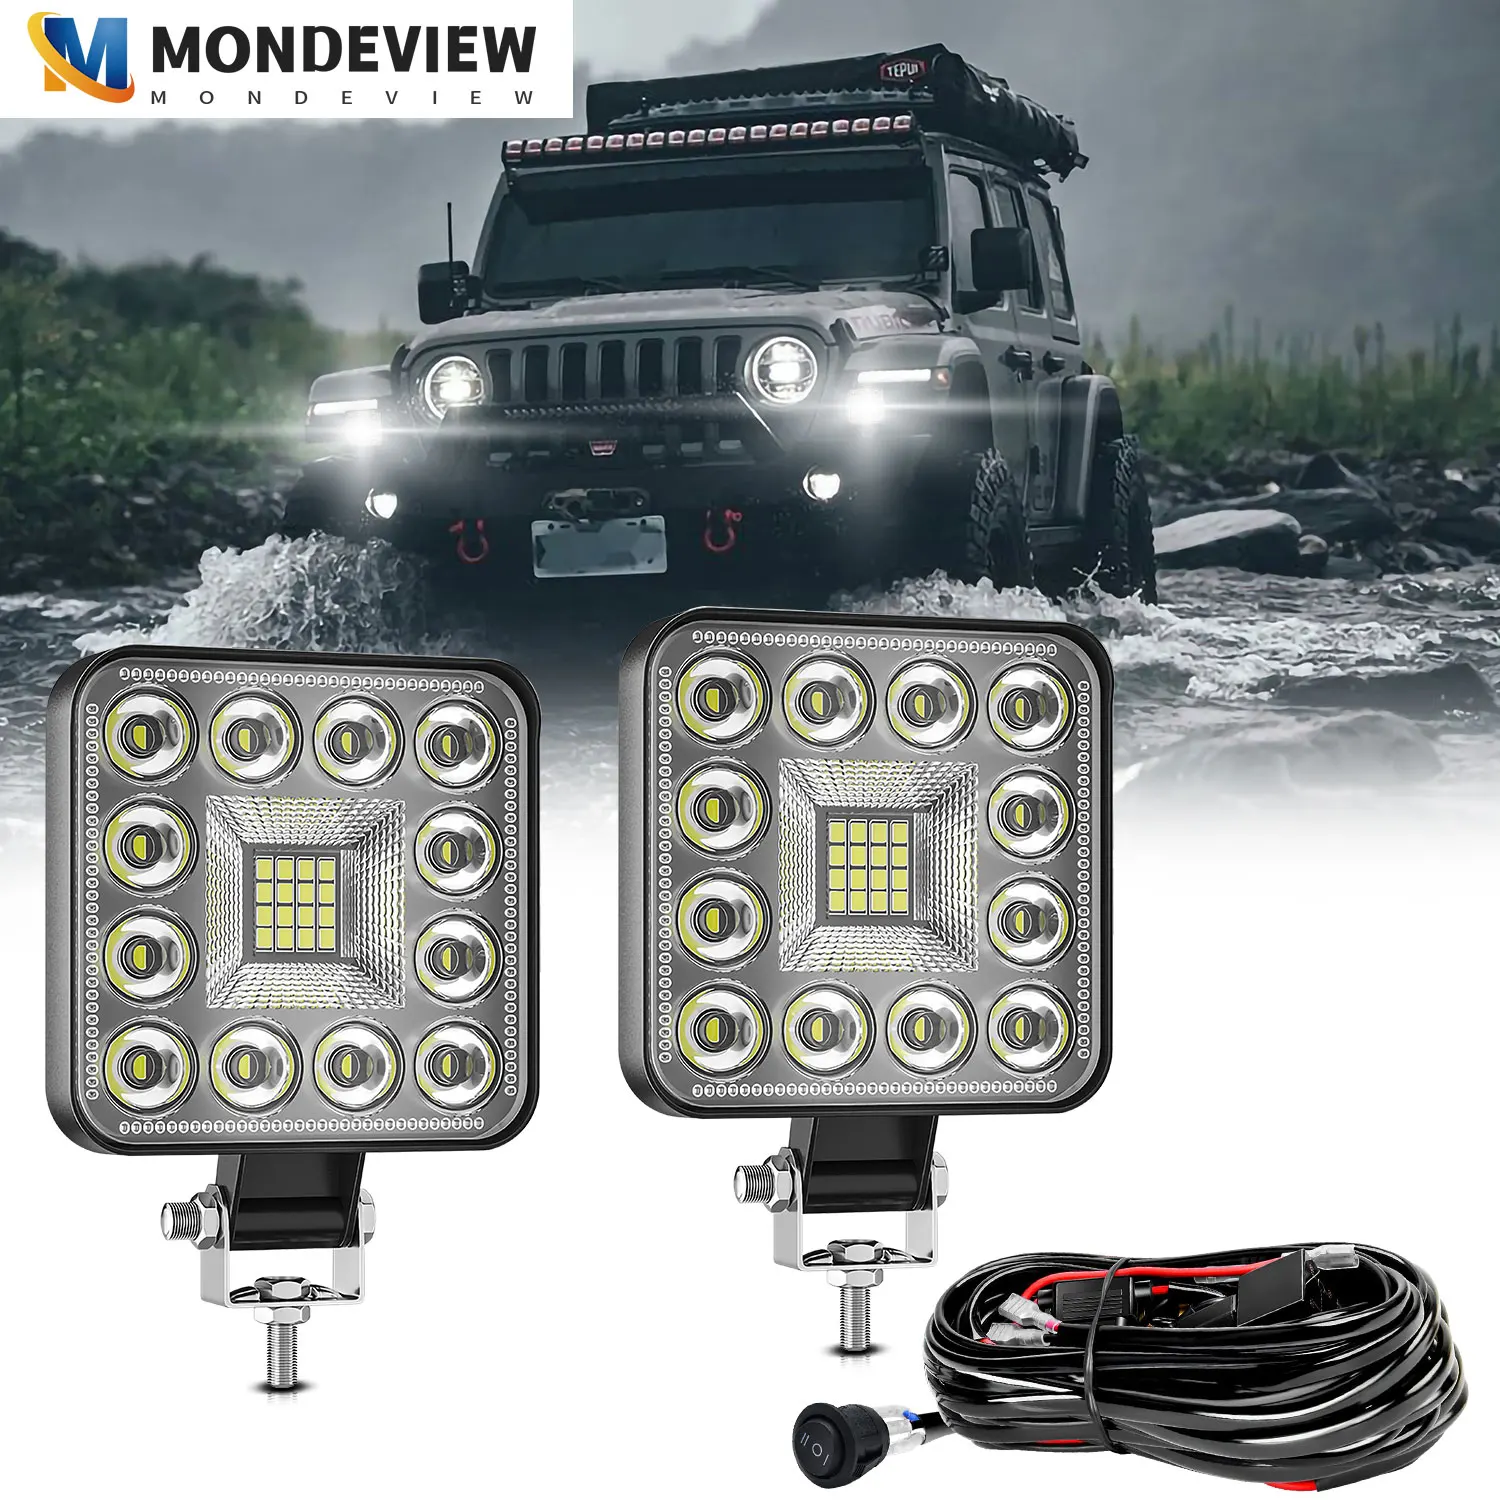 

MONDEVIEW E21 3-inch Square LED Work Light Off-road 4X4 Spotlight 30V Jeep Truck, Motorcycle SUV ATV Running Driving Lights